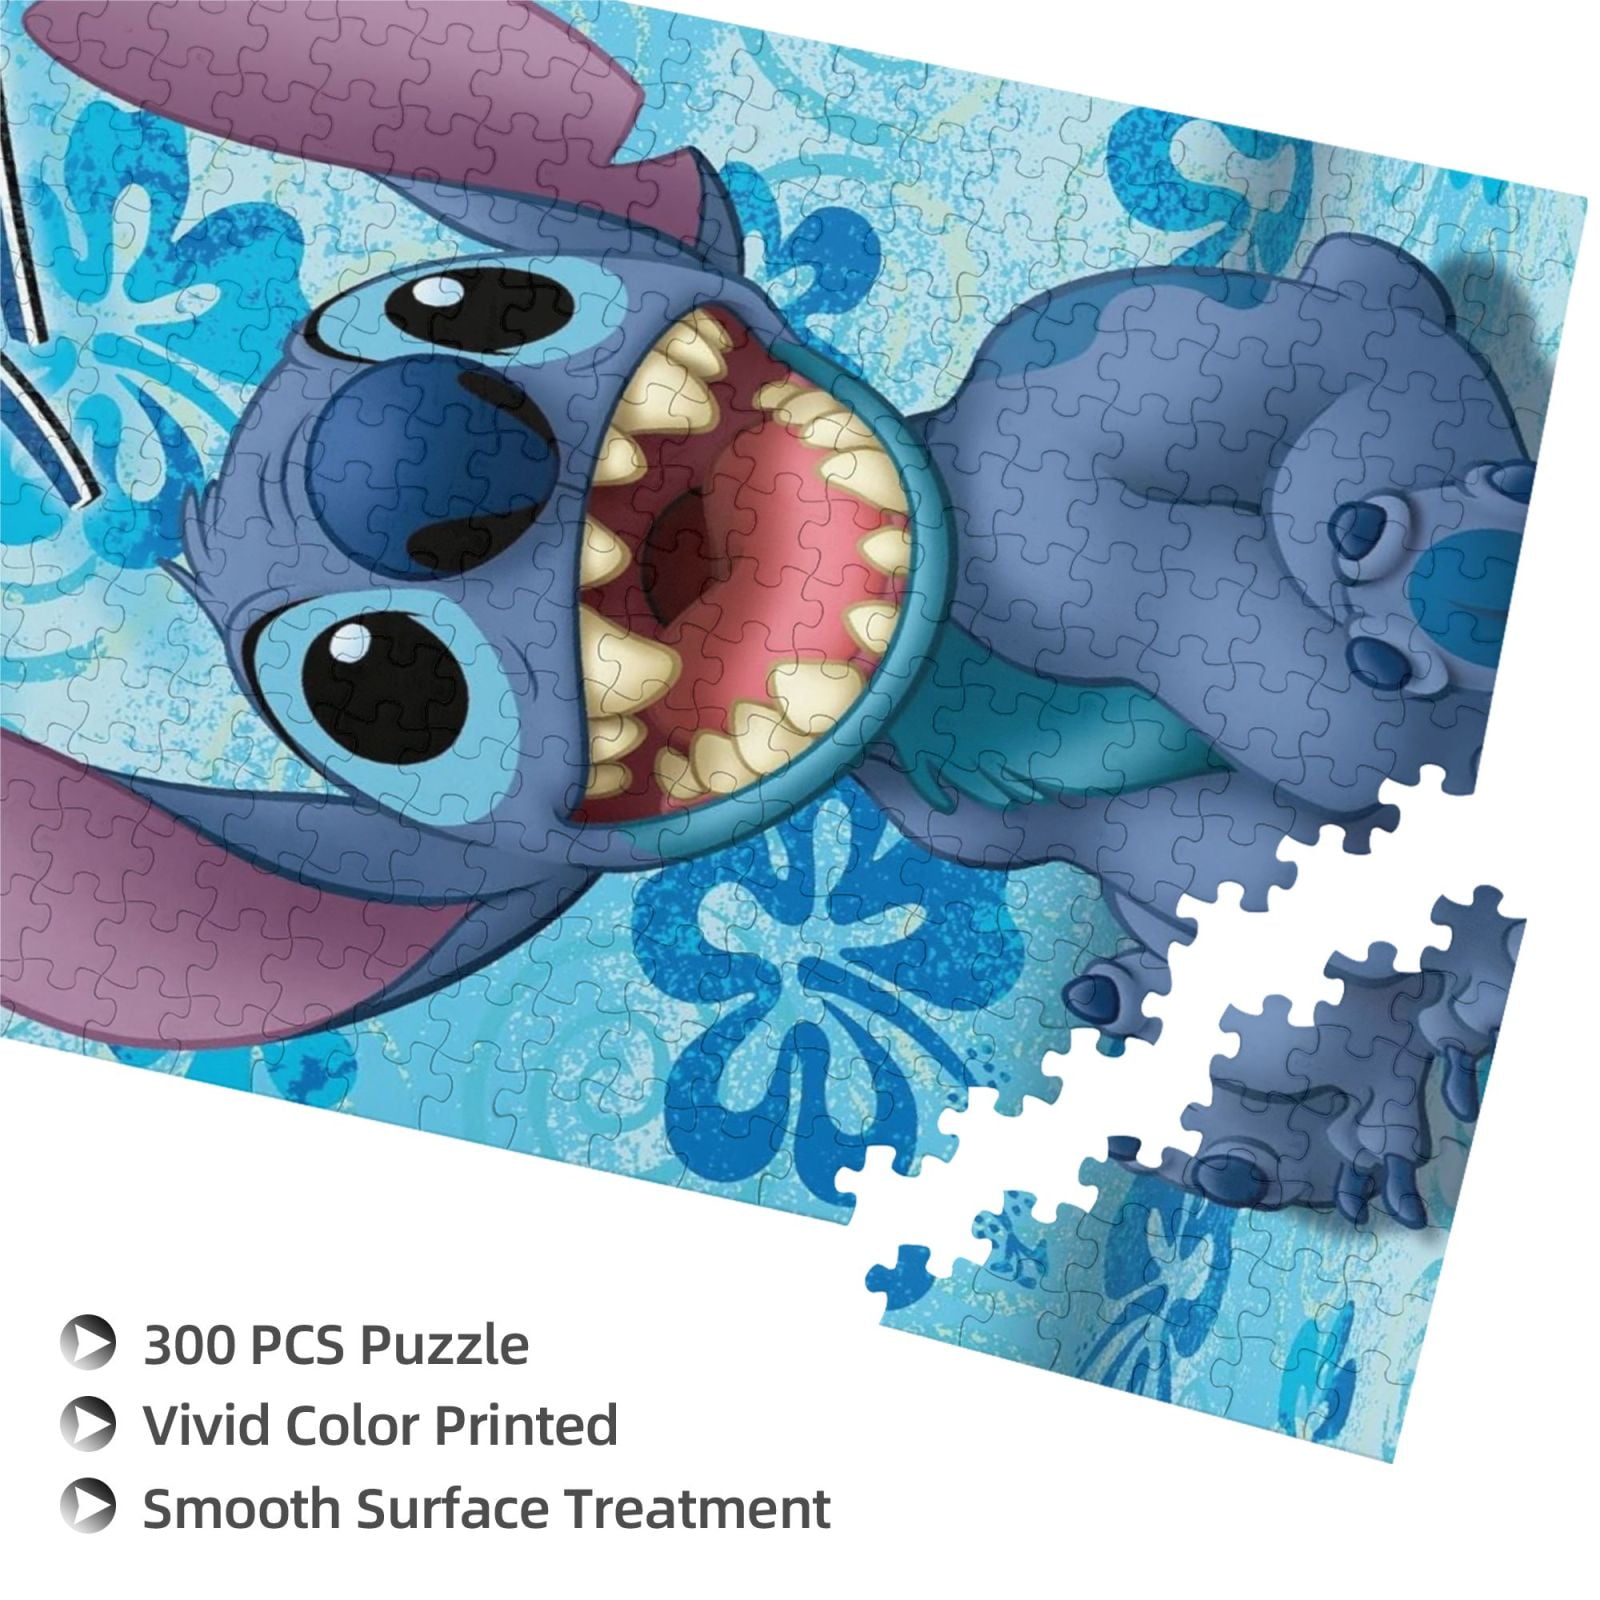 Stitch Puzzle, 500 Pieces, 20.5'' X 15.1'' ¨C Jigsaw Puzzle ¨C Thick,  Sturdy Pieces, Challenging Family Activity, Great Gift Idea